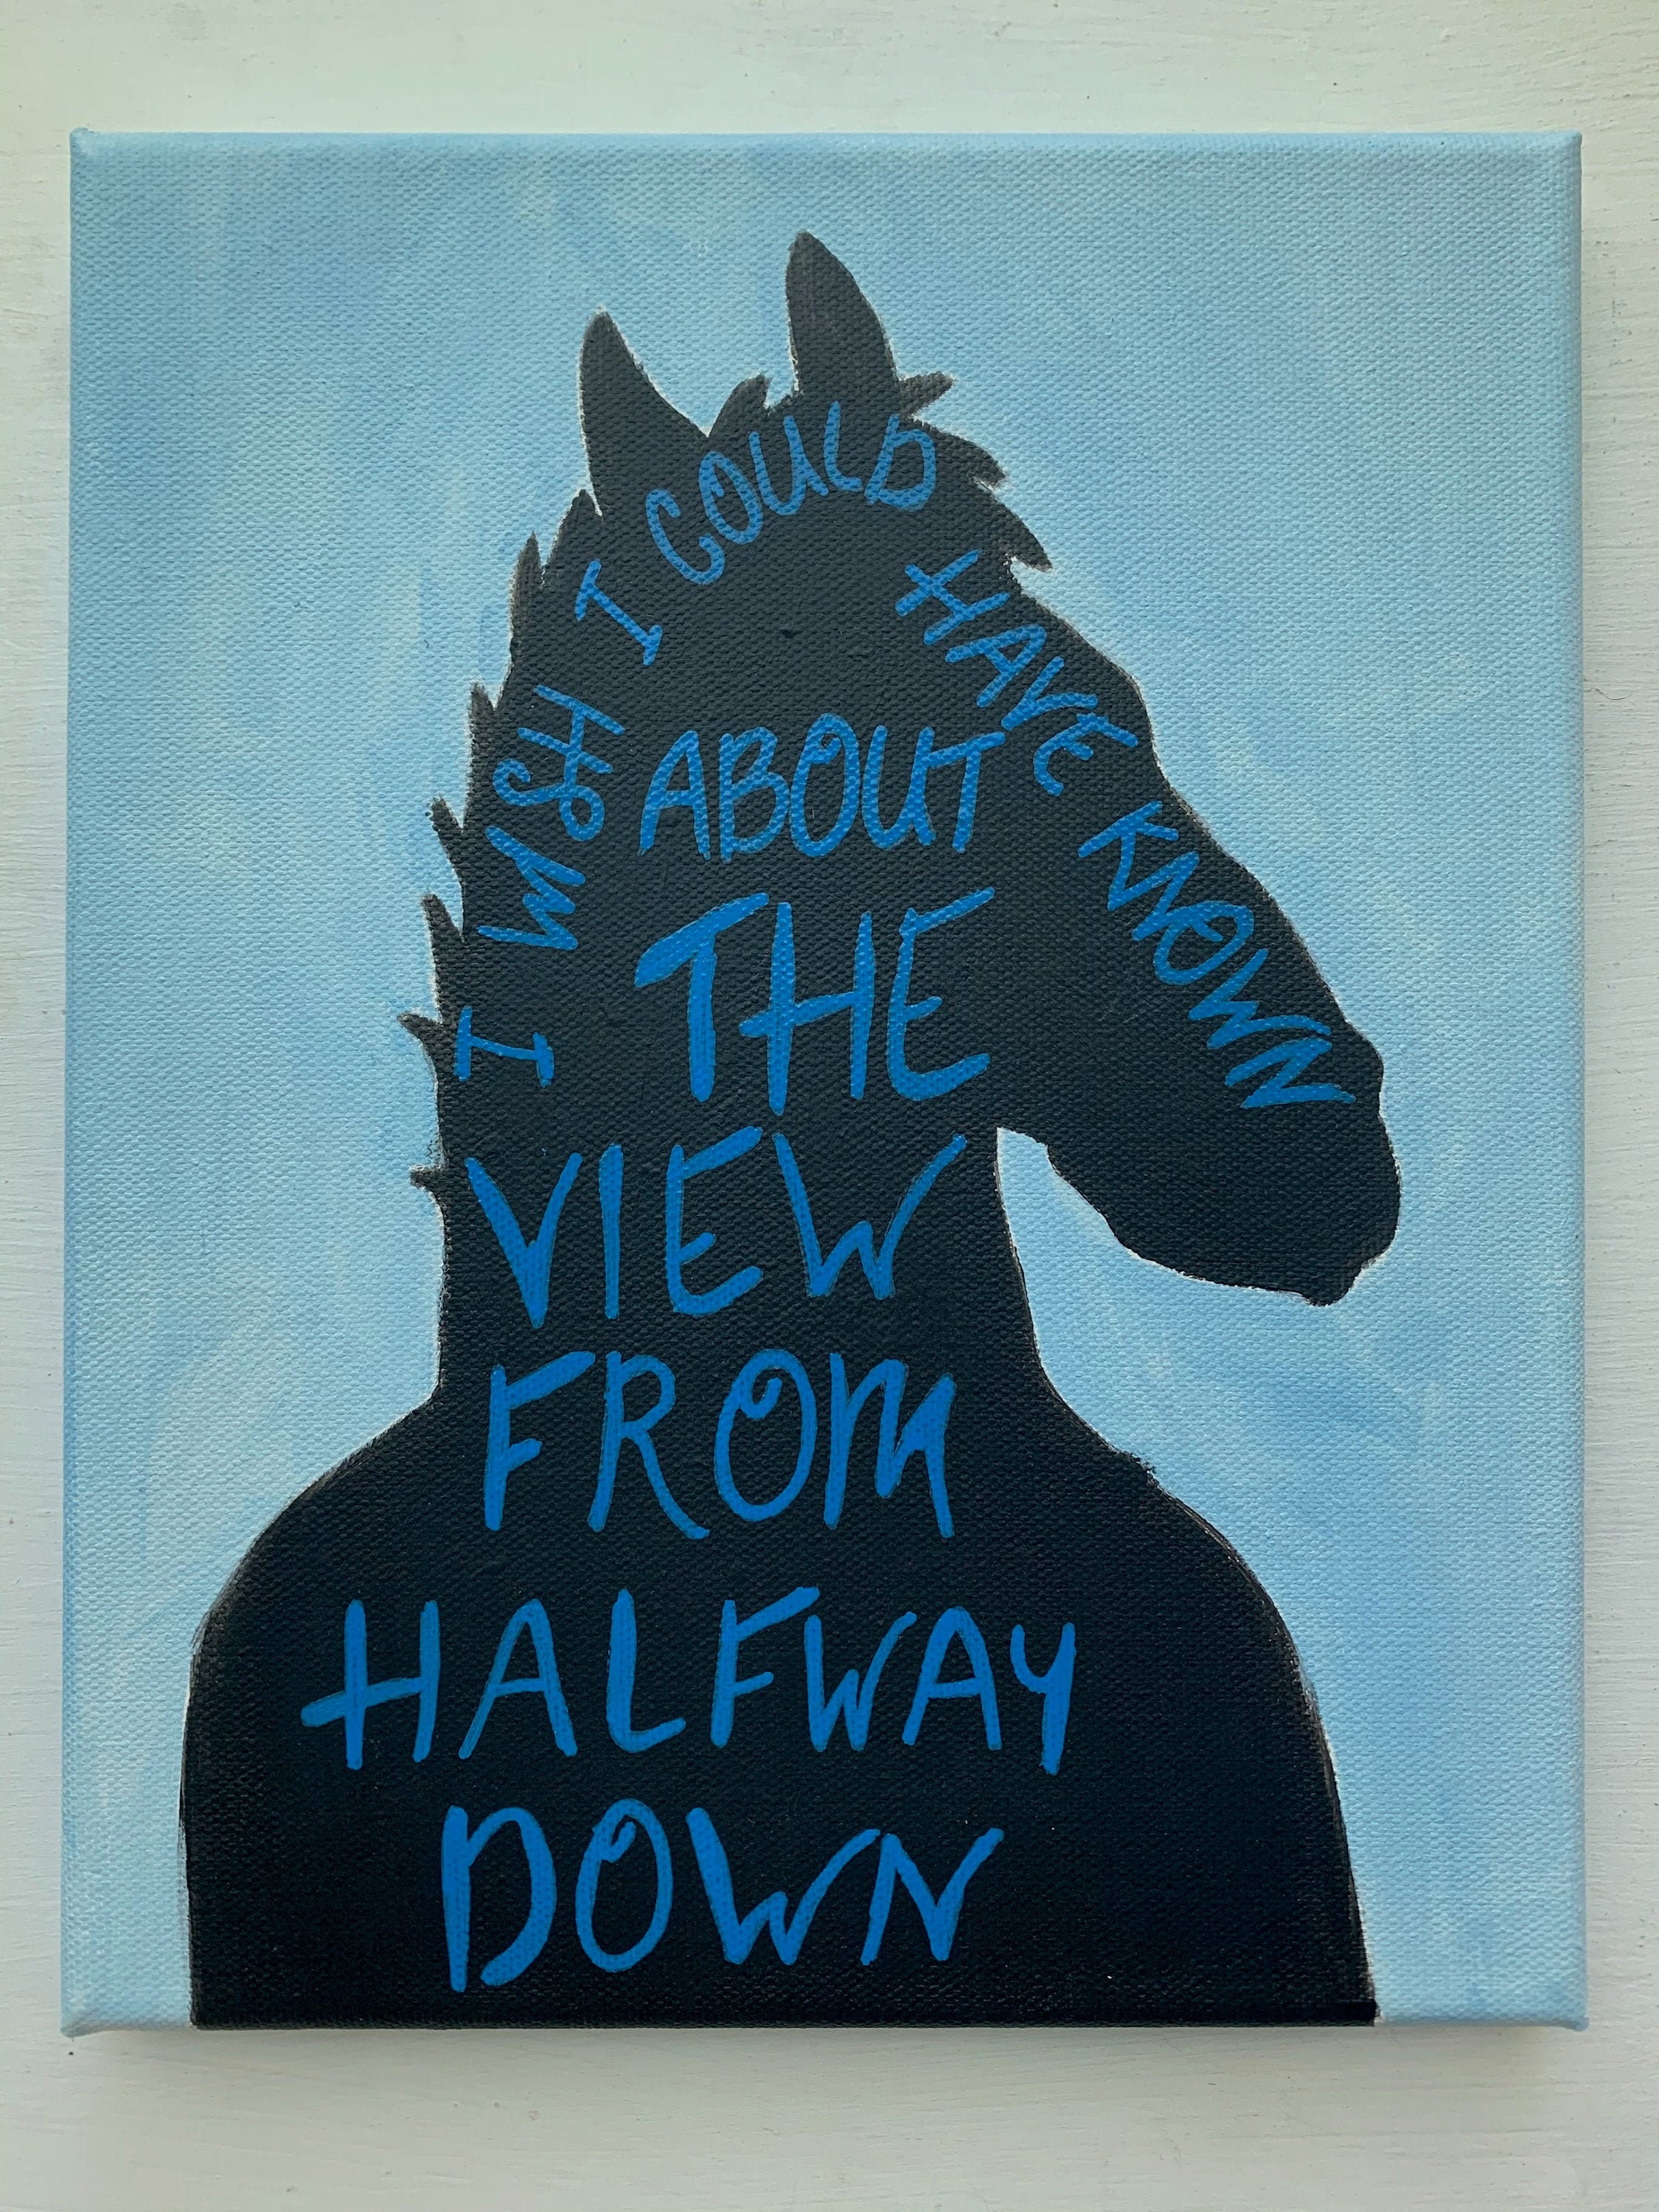 Some art I made of The View from Halfway Down  BoJackHorseman  Bojack  horseman Horseman Art